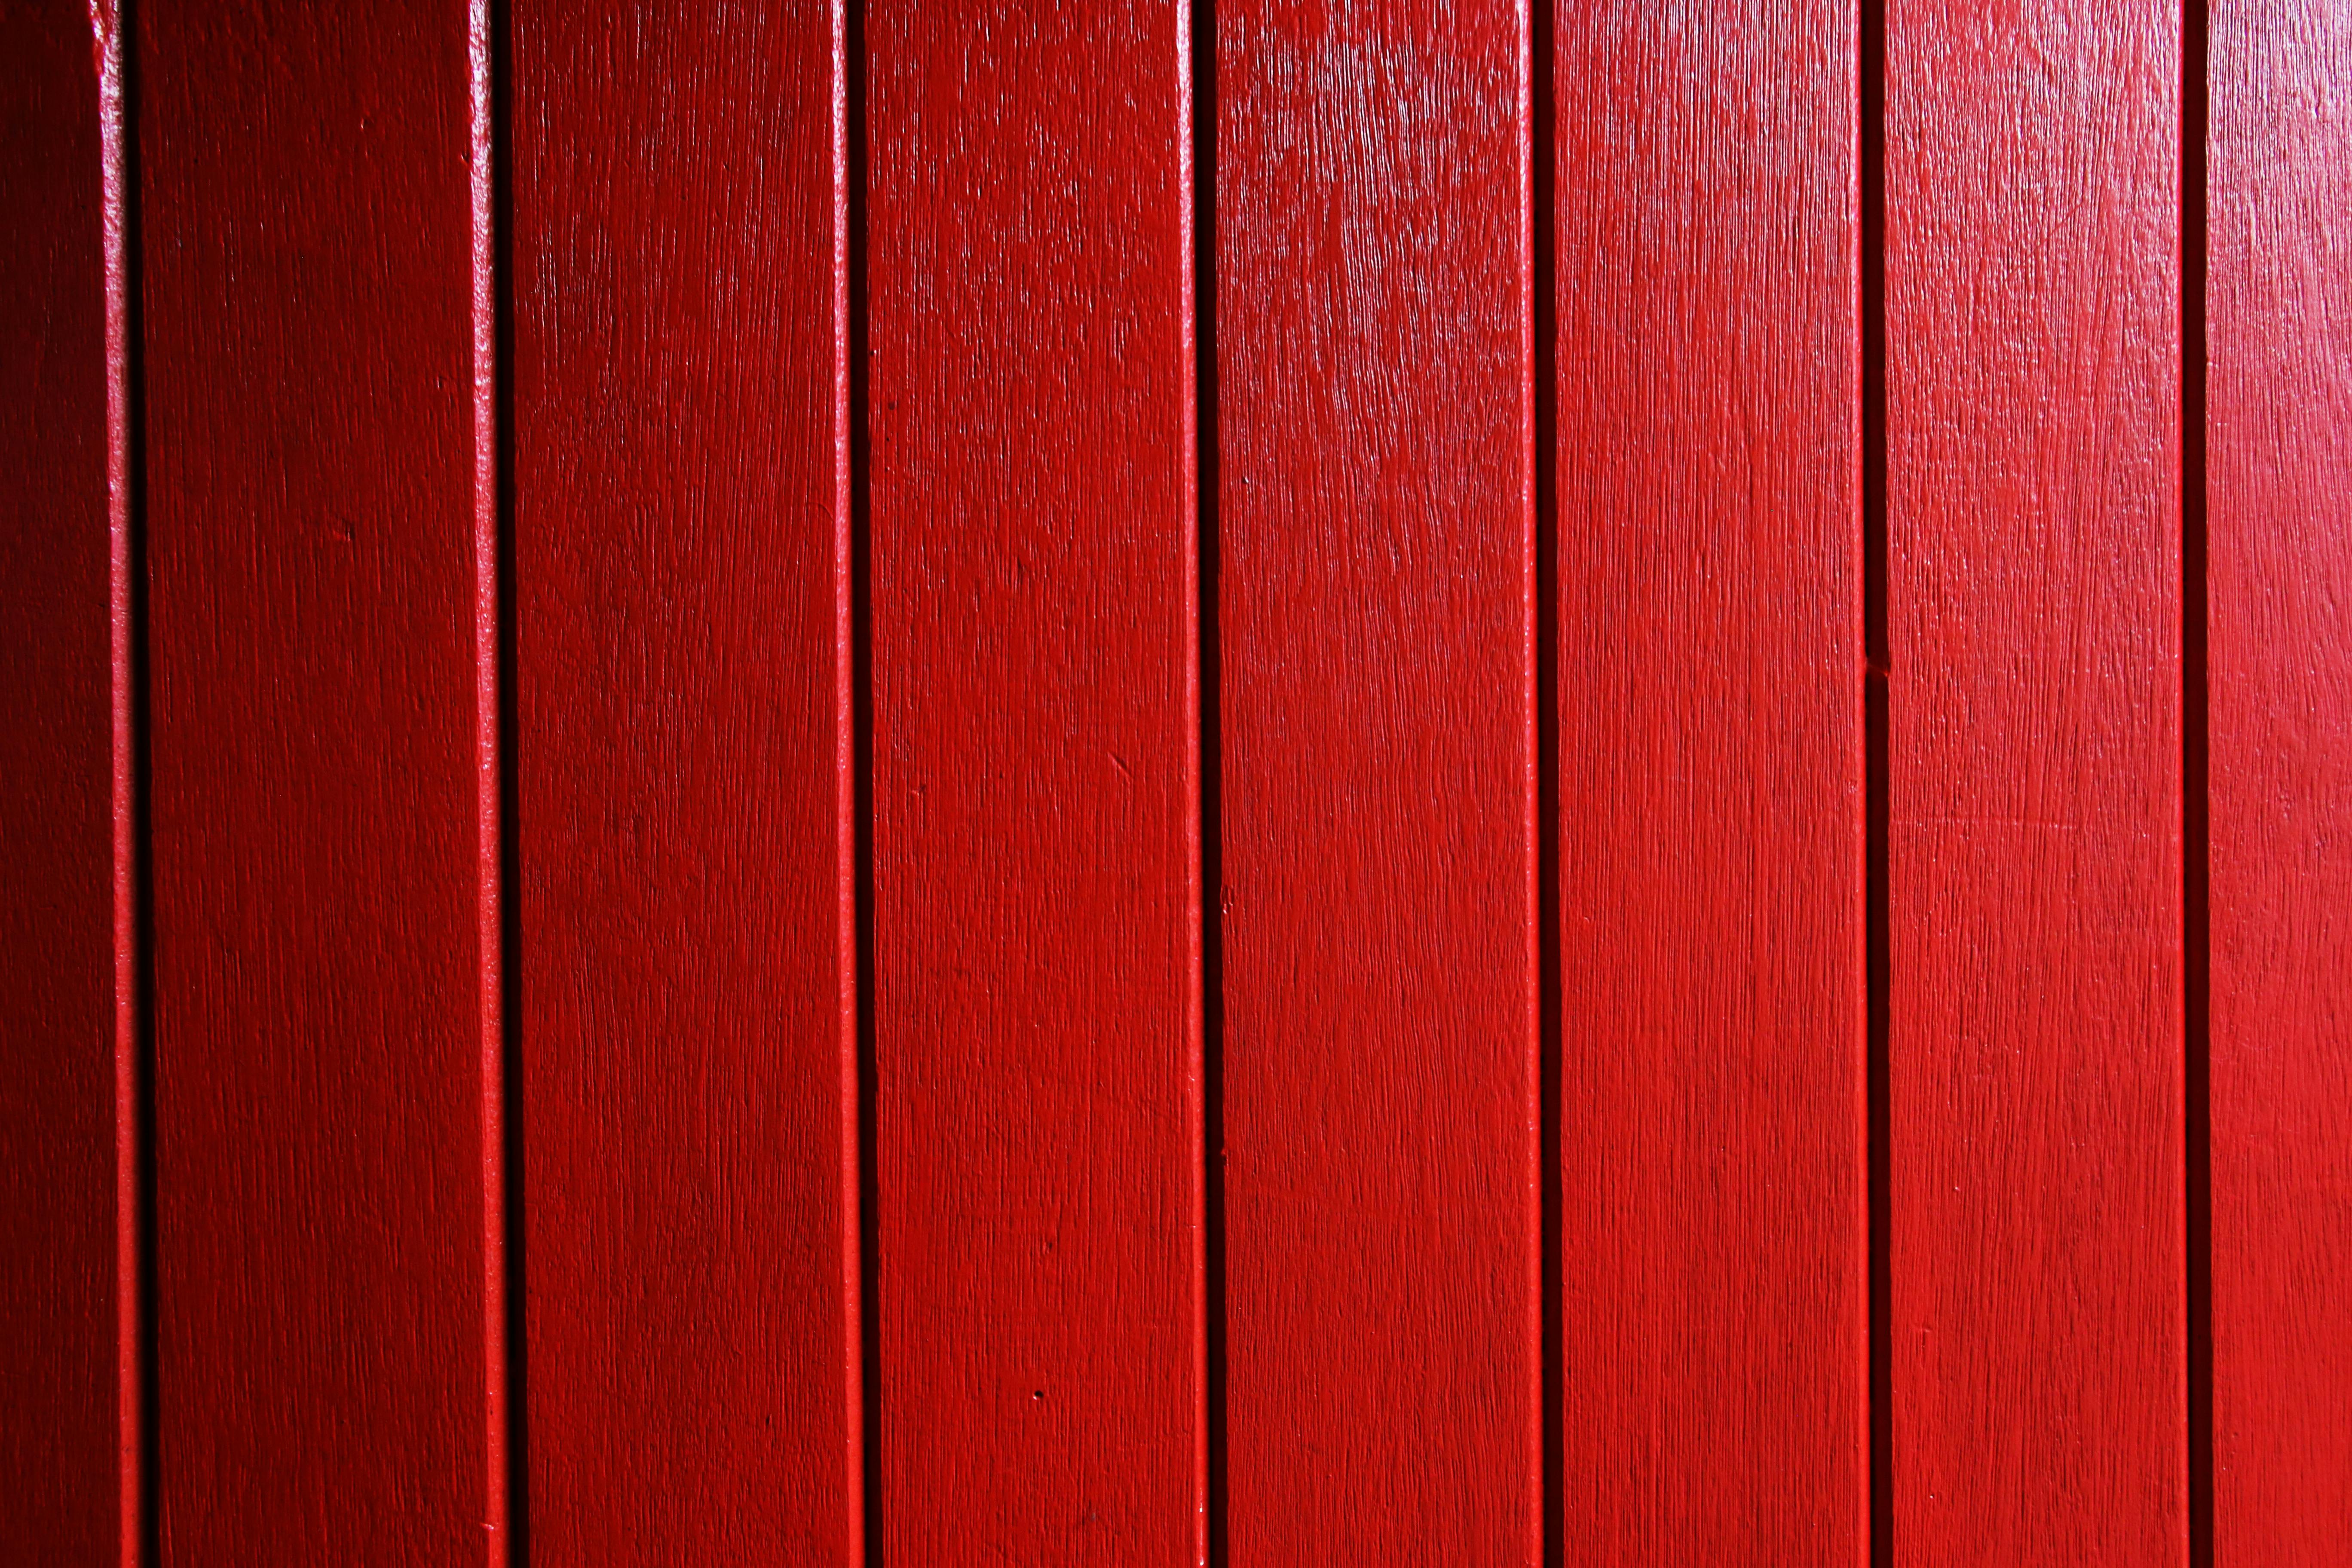 Details 100 red wood background